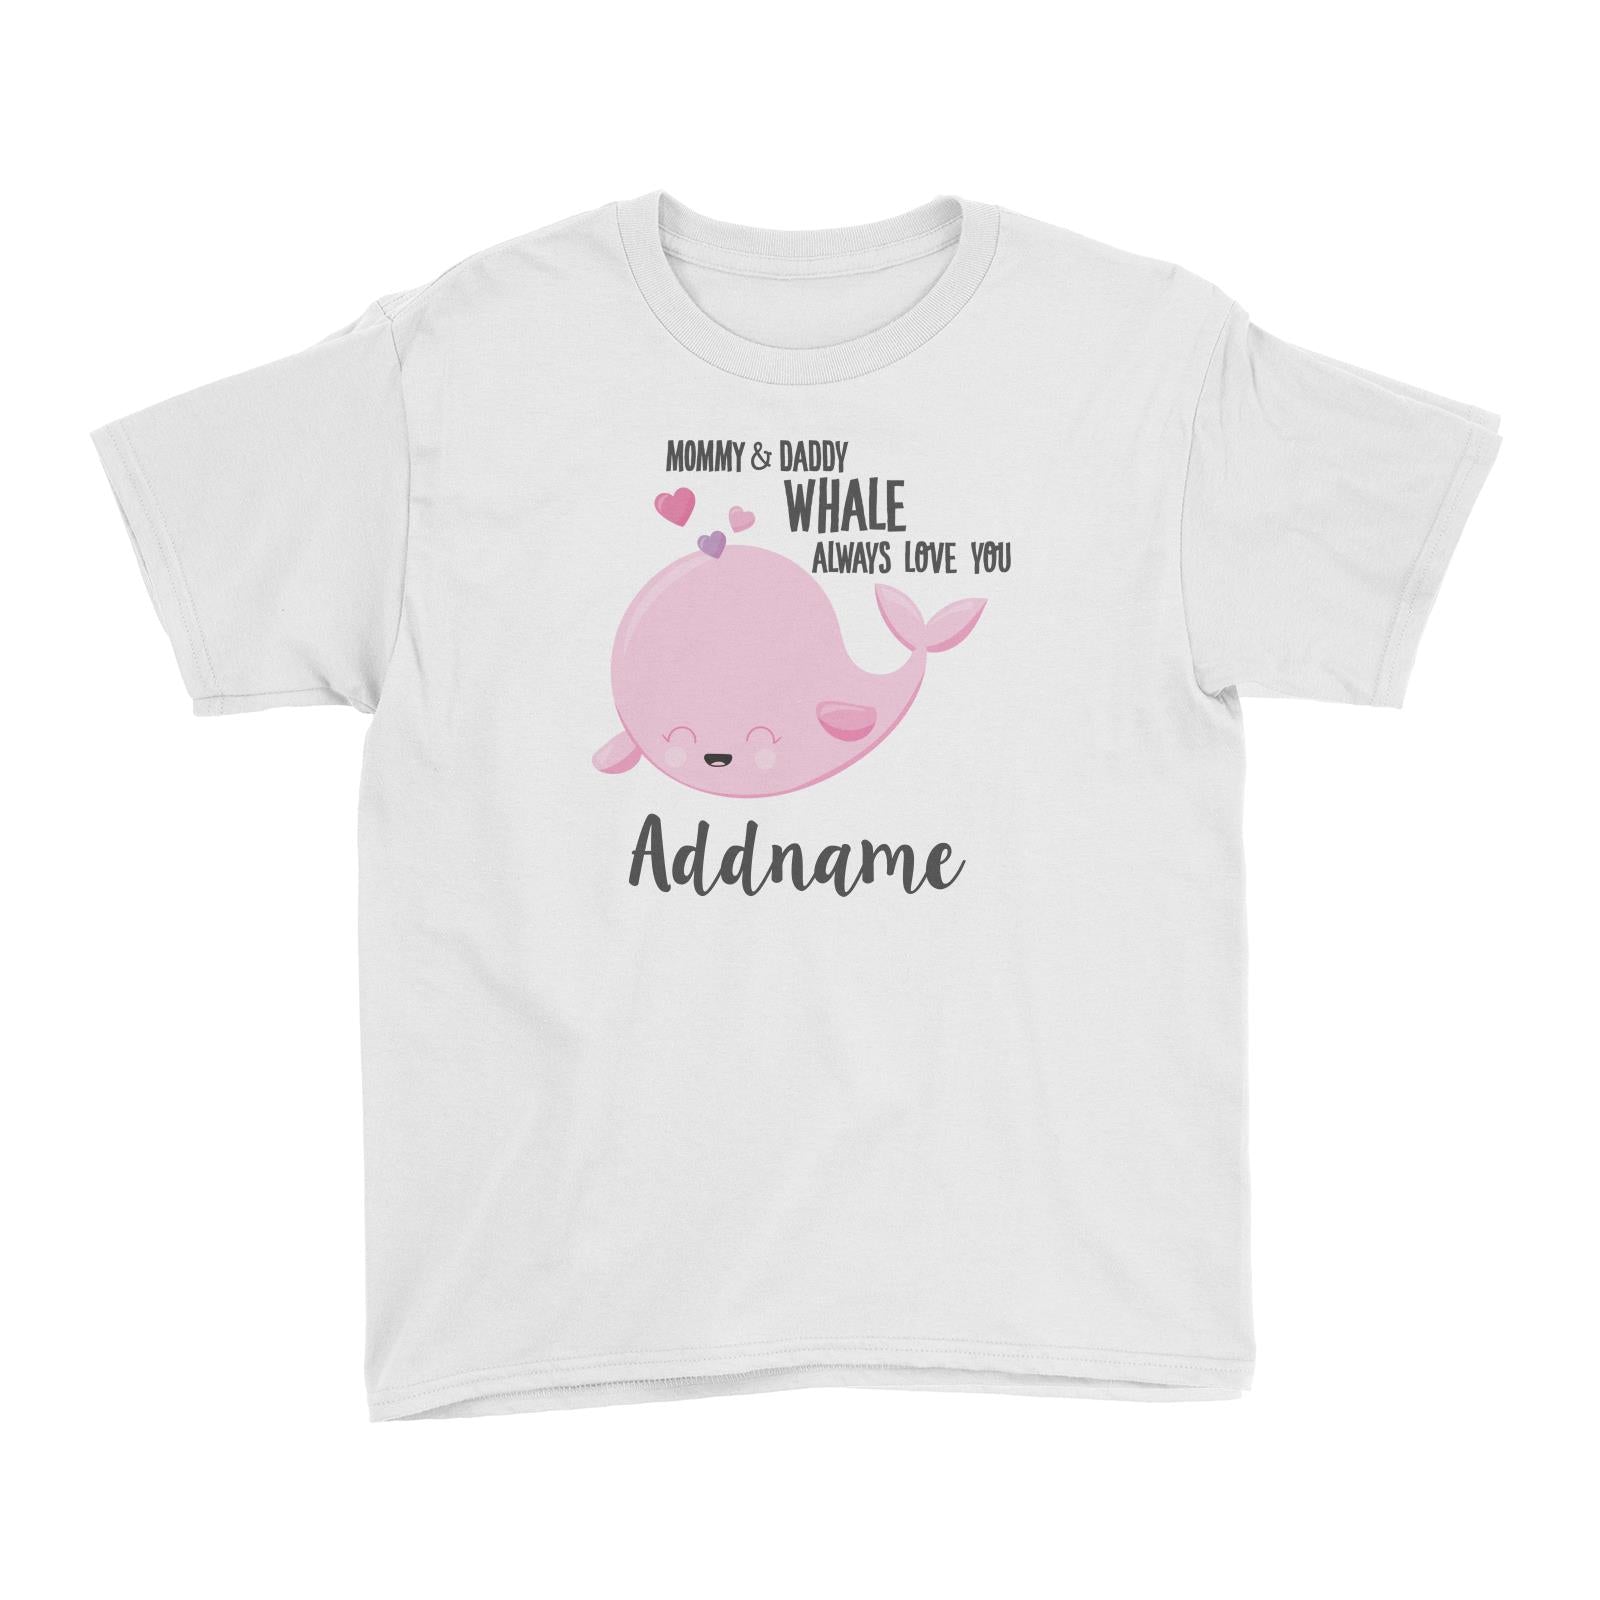 Cute Sea Animals Mommy & Daddy Whale Always Love You Addname Kid's T-Shirt